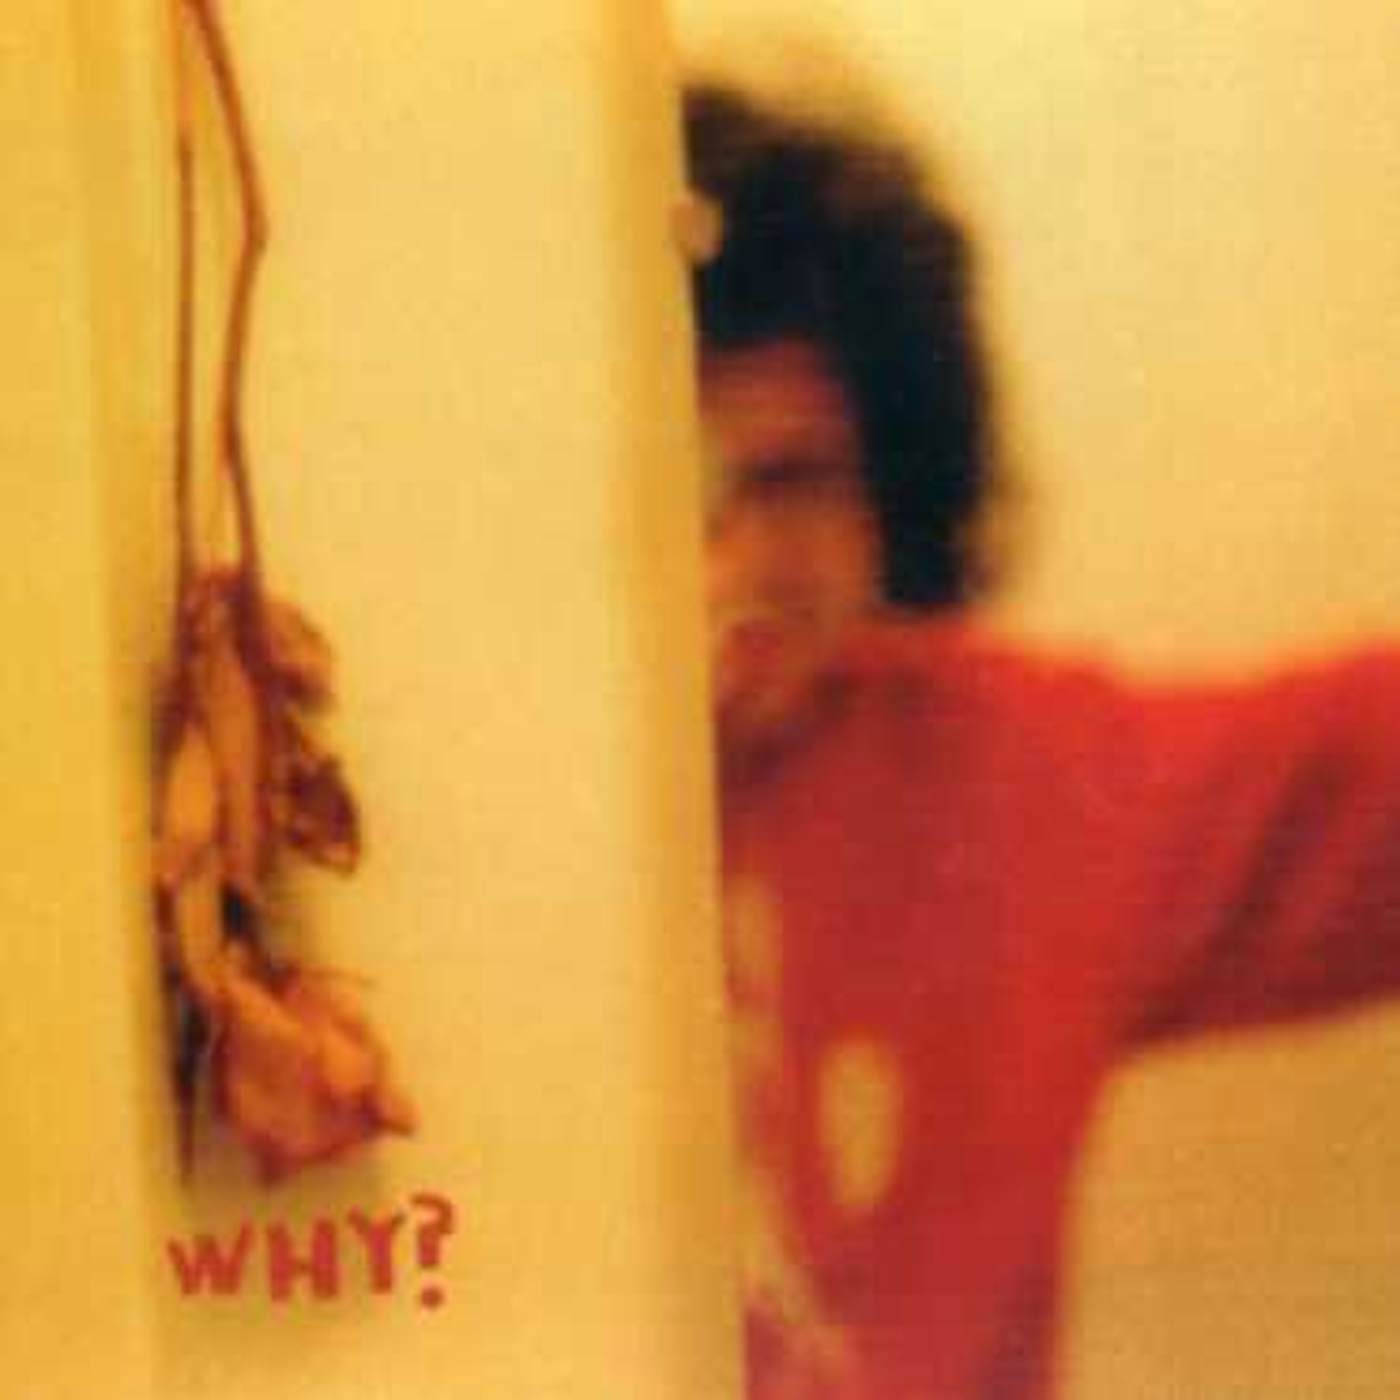 Why EARLY WHITNEY CD